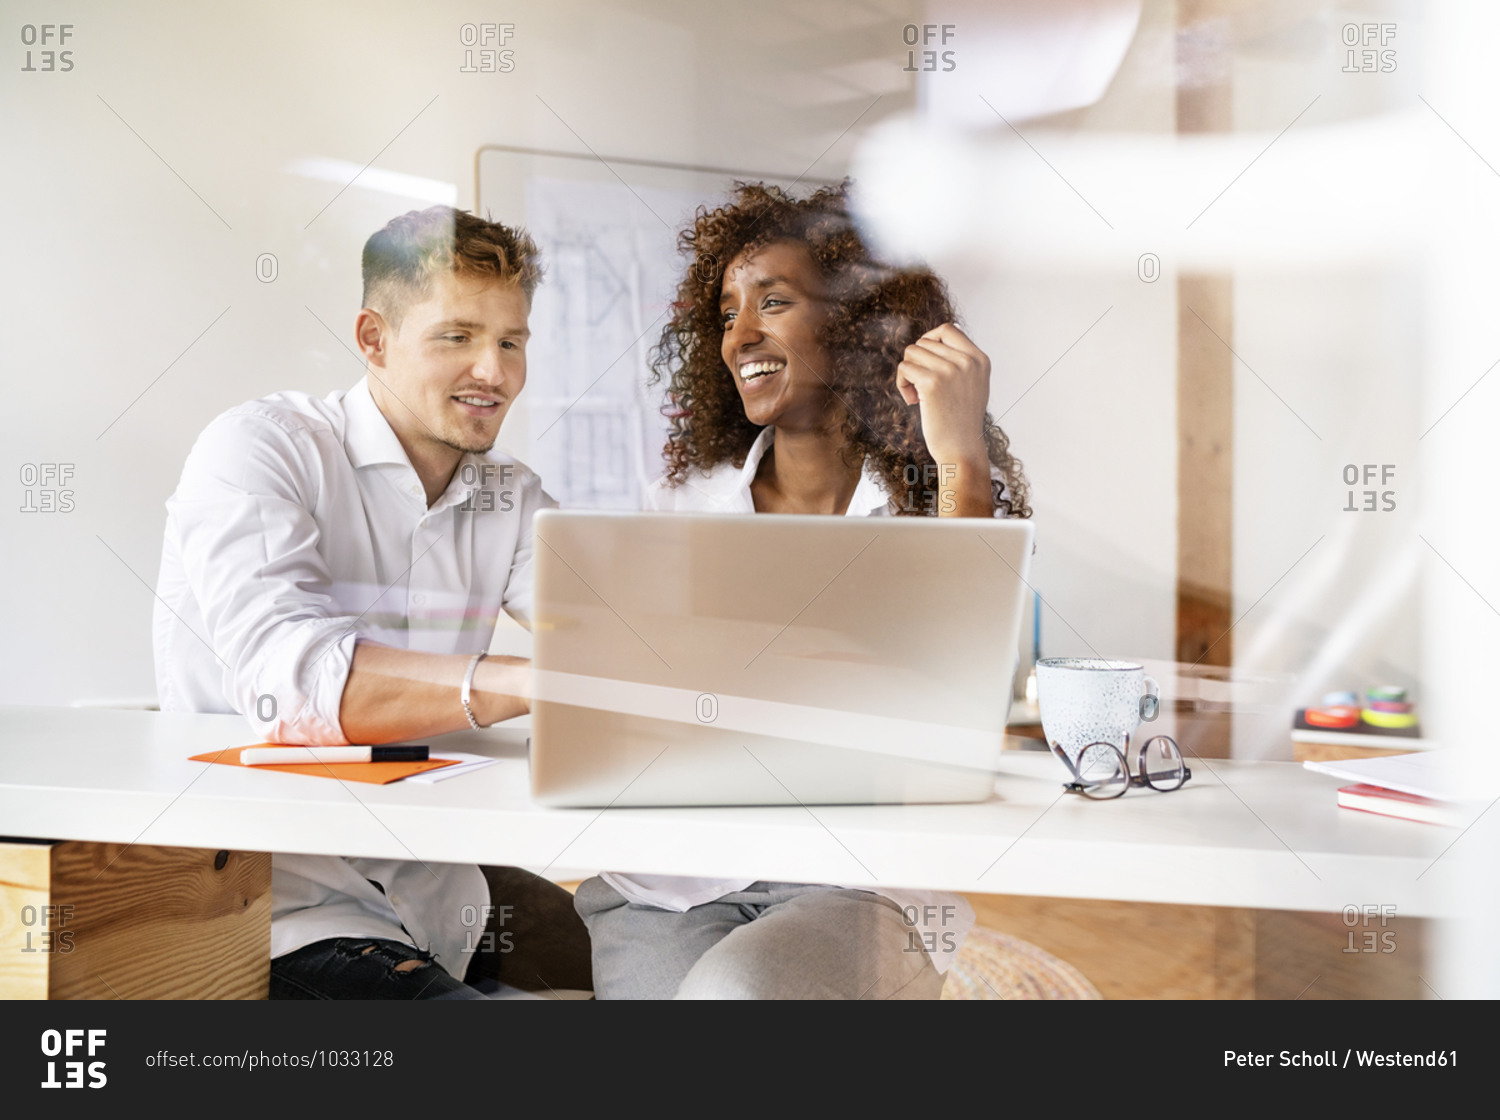 Smiling colleagues discussing over laptop on desk in office seen through window